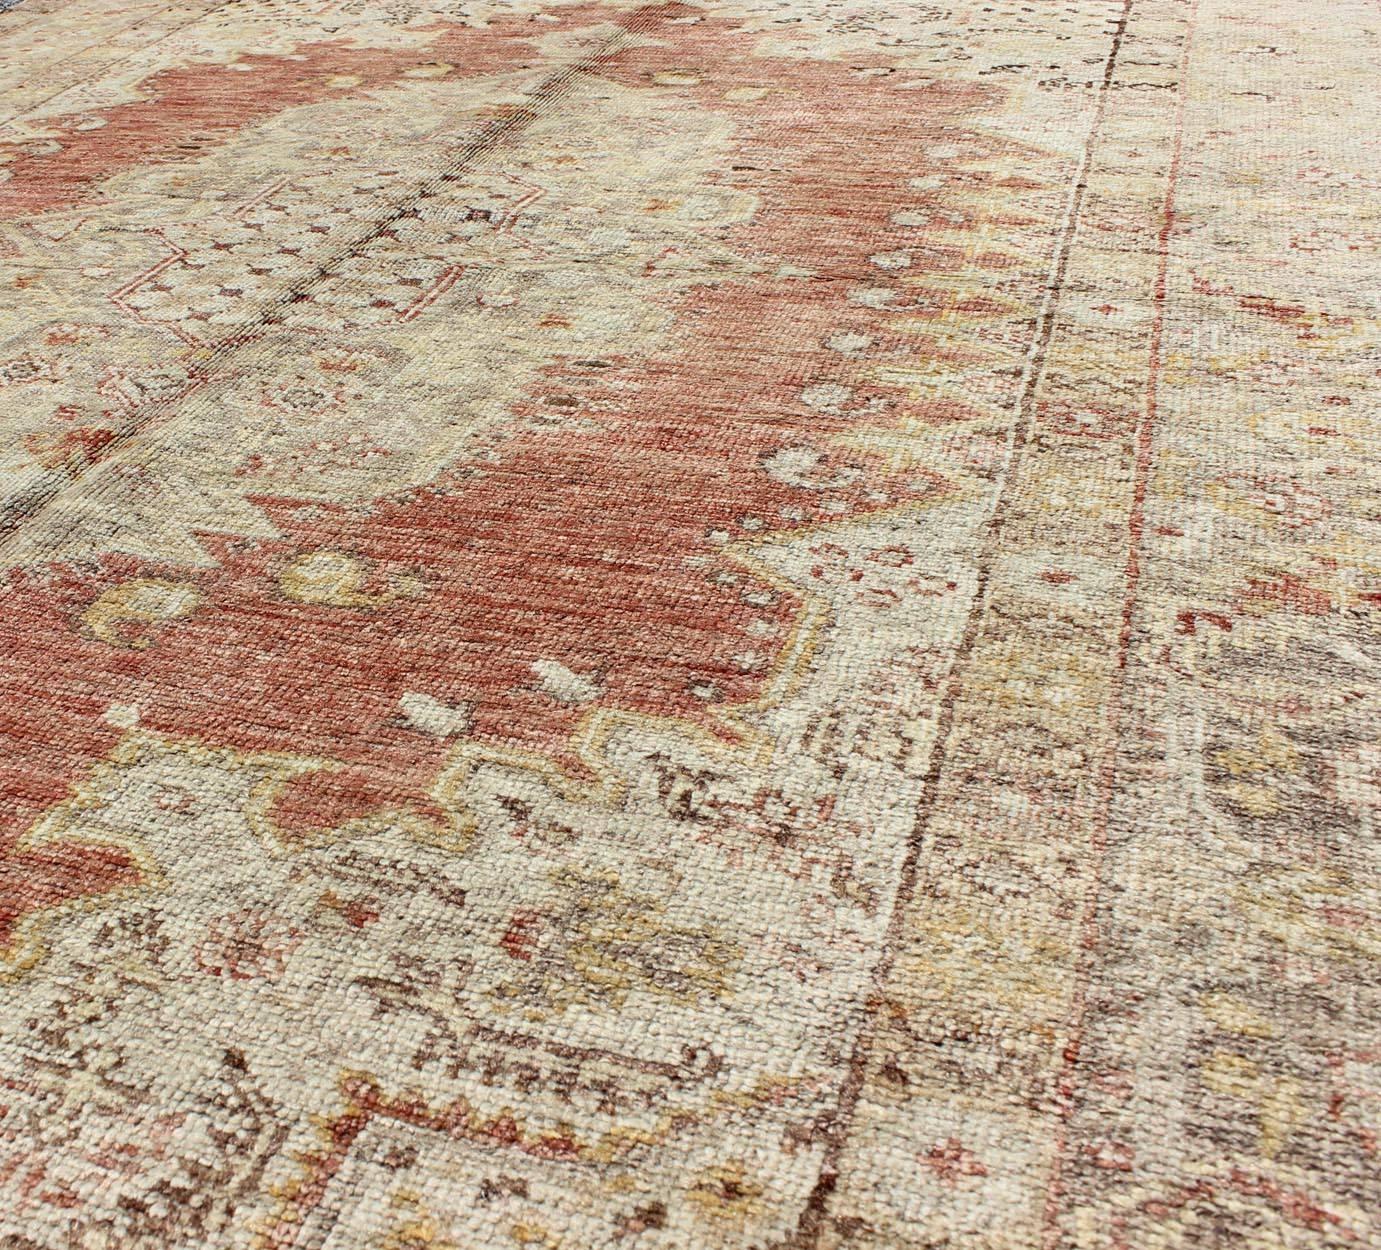 Hand-Knotted Antique Turkish Sevas Rug with Fine Weave in Cream, Sand and Red